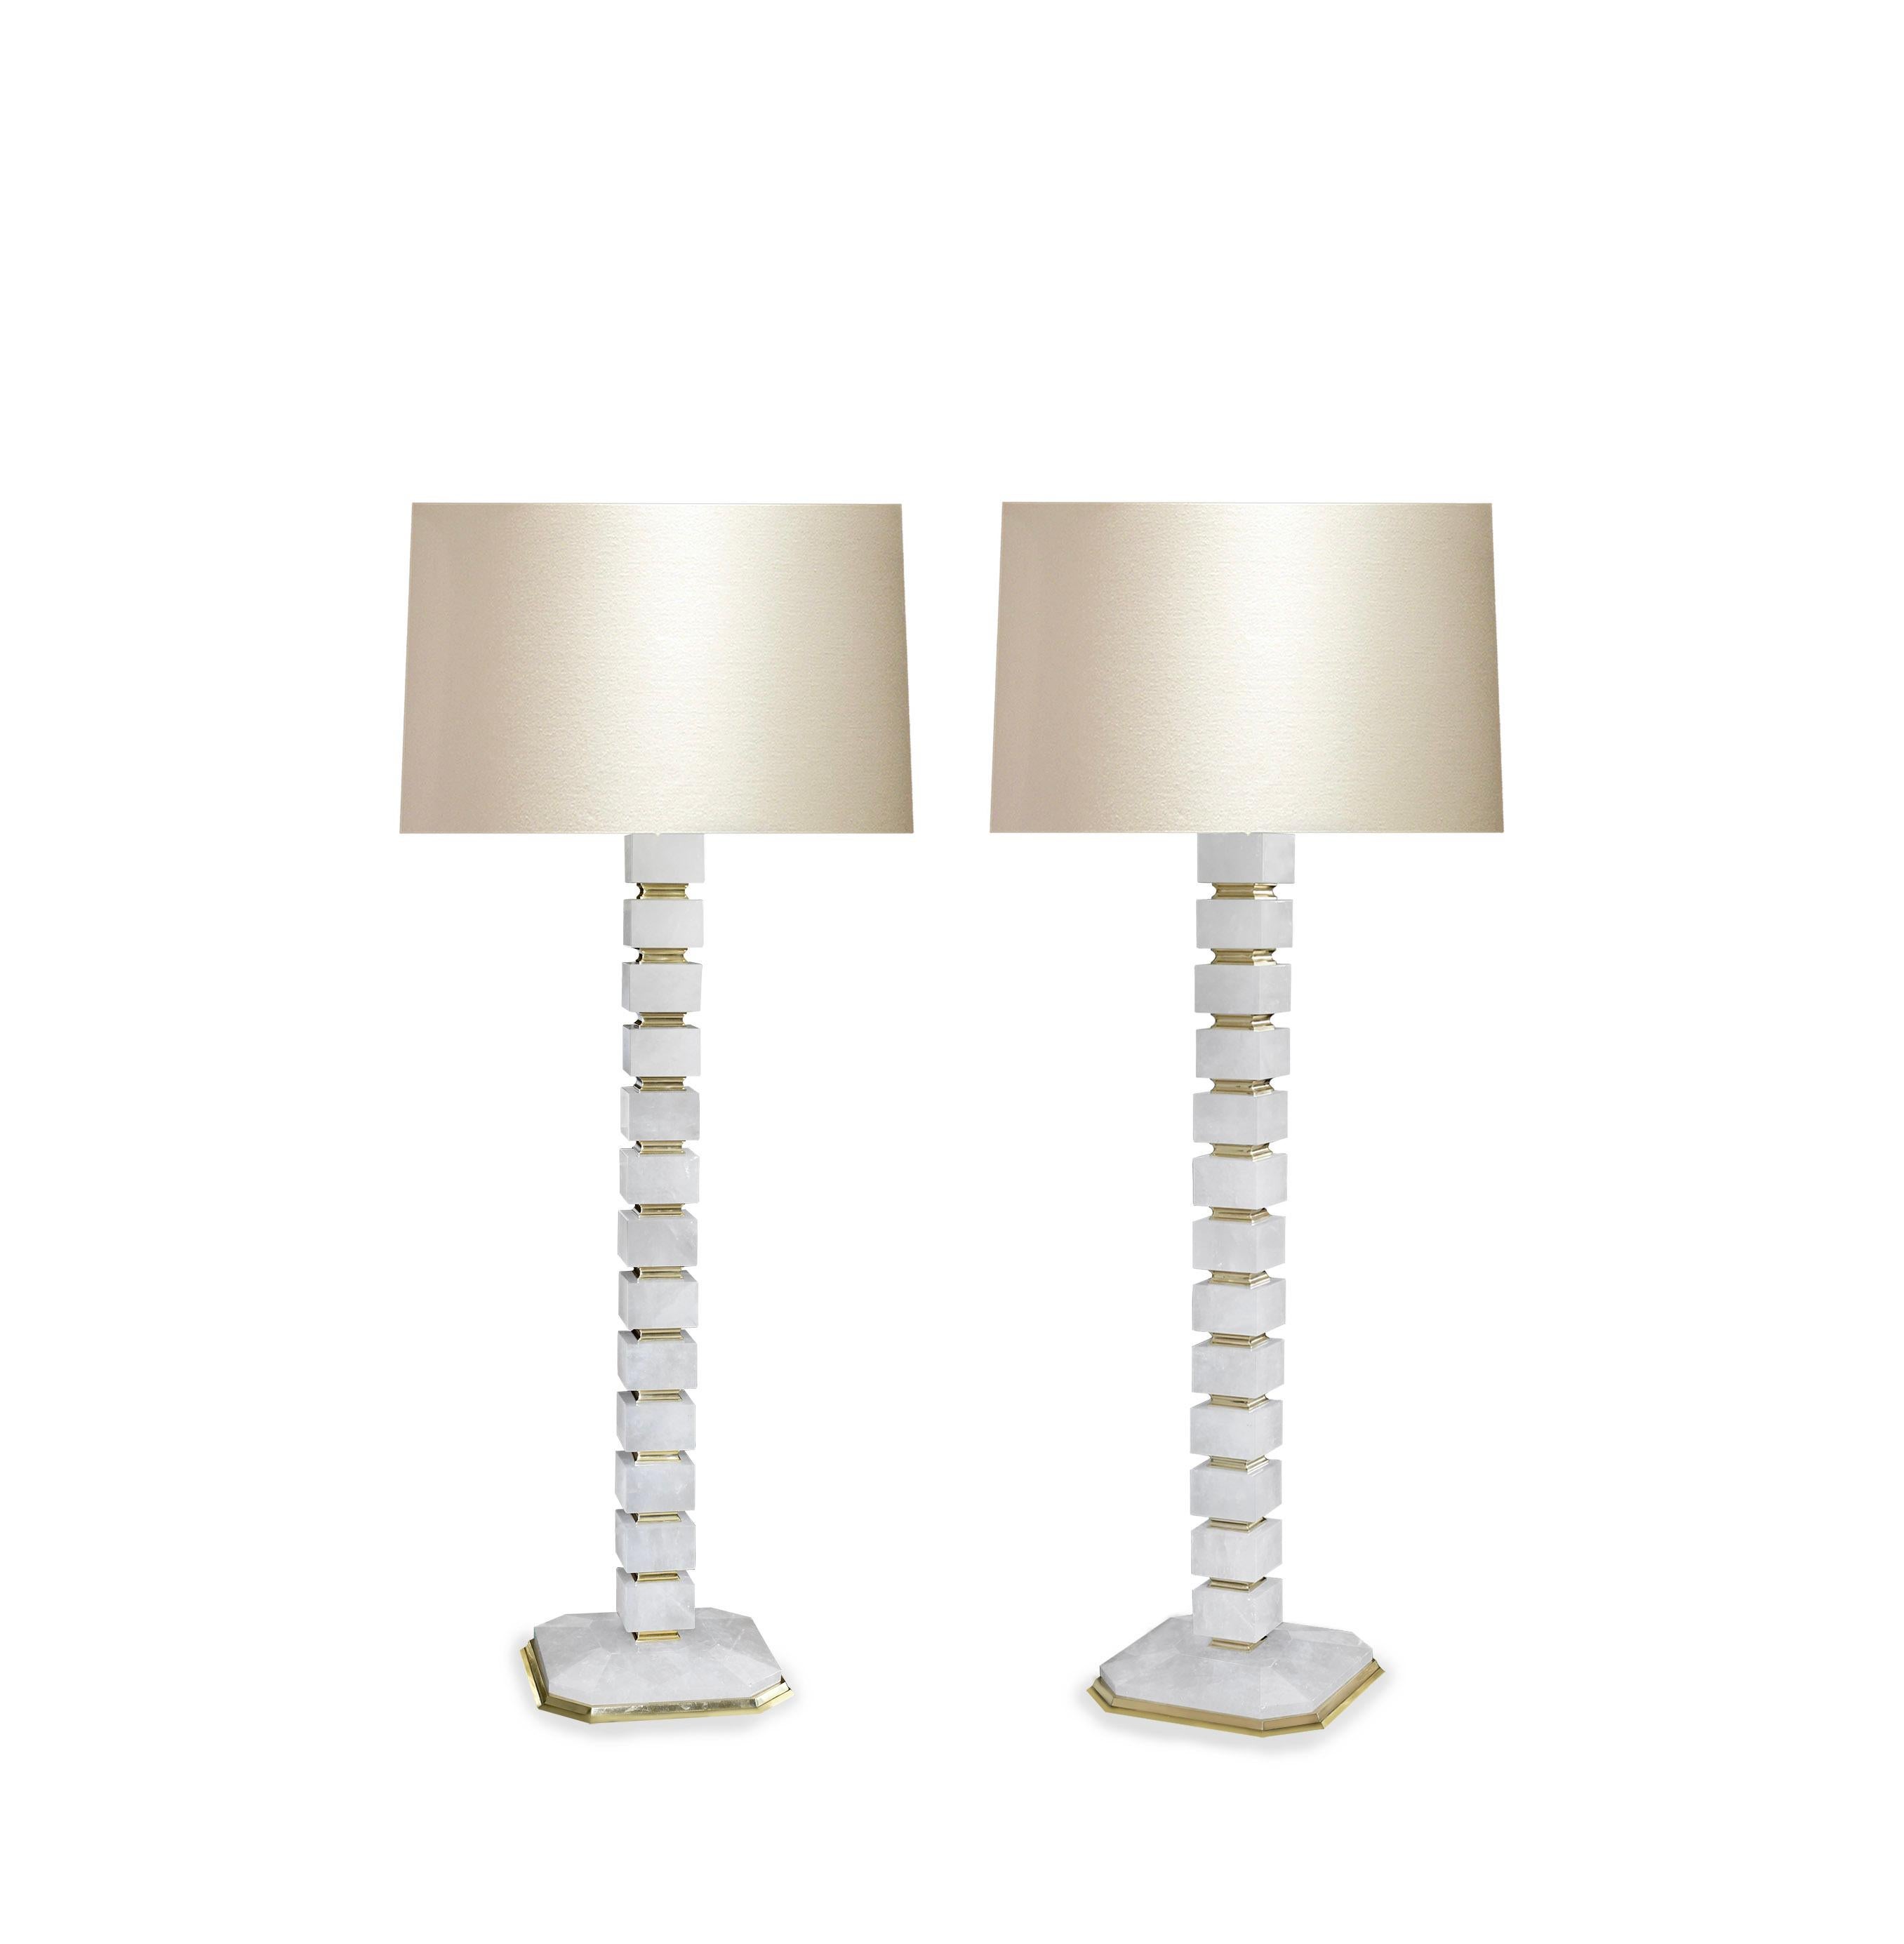 Pair of contemporary block form rock crystal lamps with polished brass base and inserted decoration. Created by Phoenix Gallery NYC.
Measure: 50in/H to the top of the rock crystal.
Each lamp installs two sockets.
Lampshade do not include.